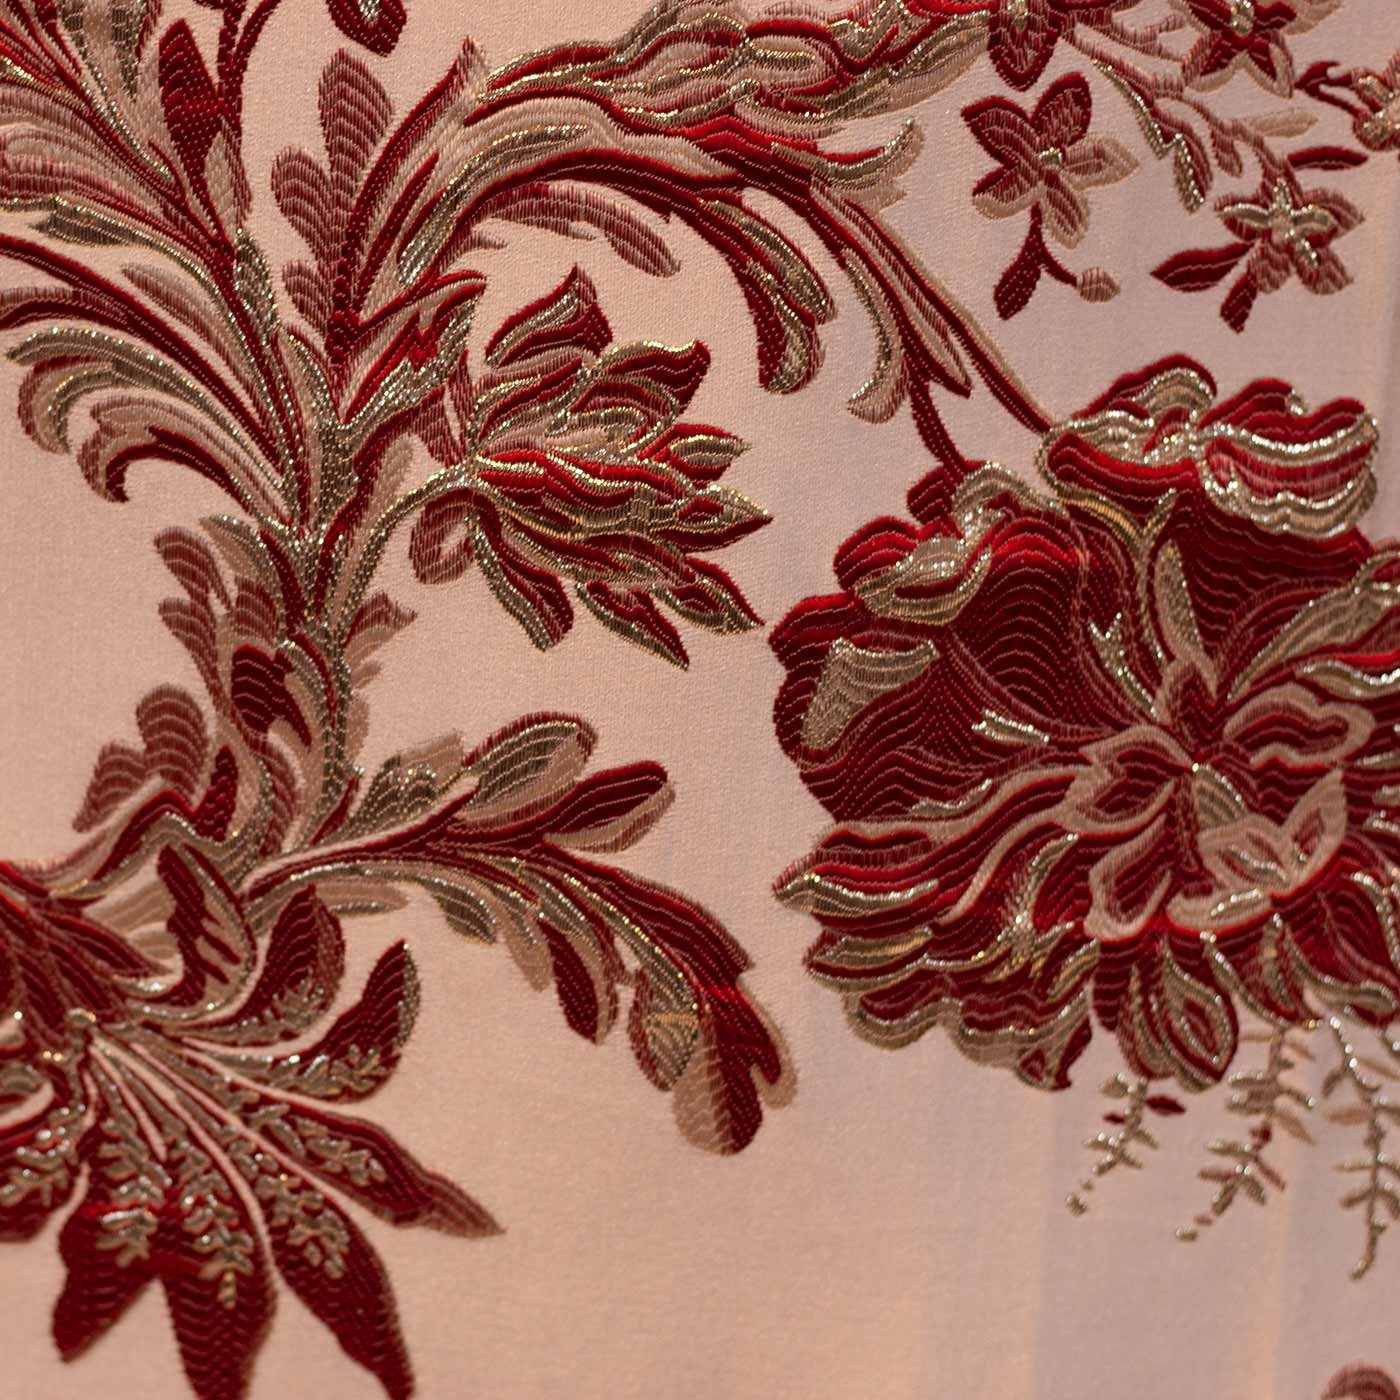 Red and Silver on Cream Floral Brocade Fabric